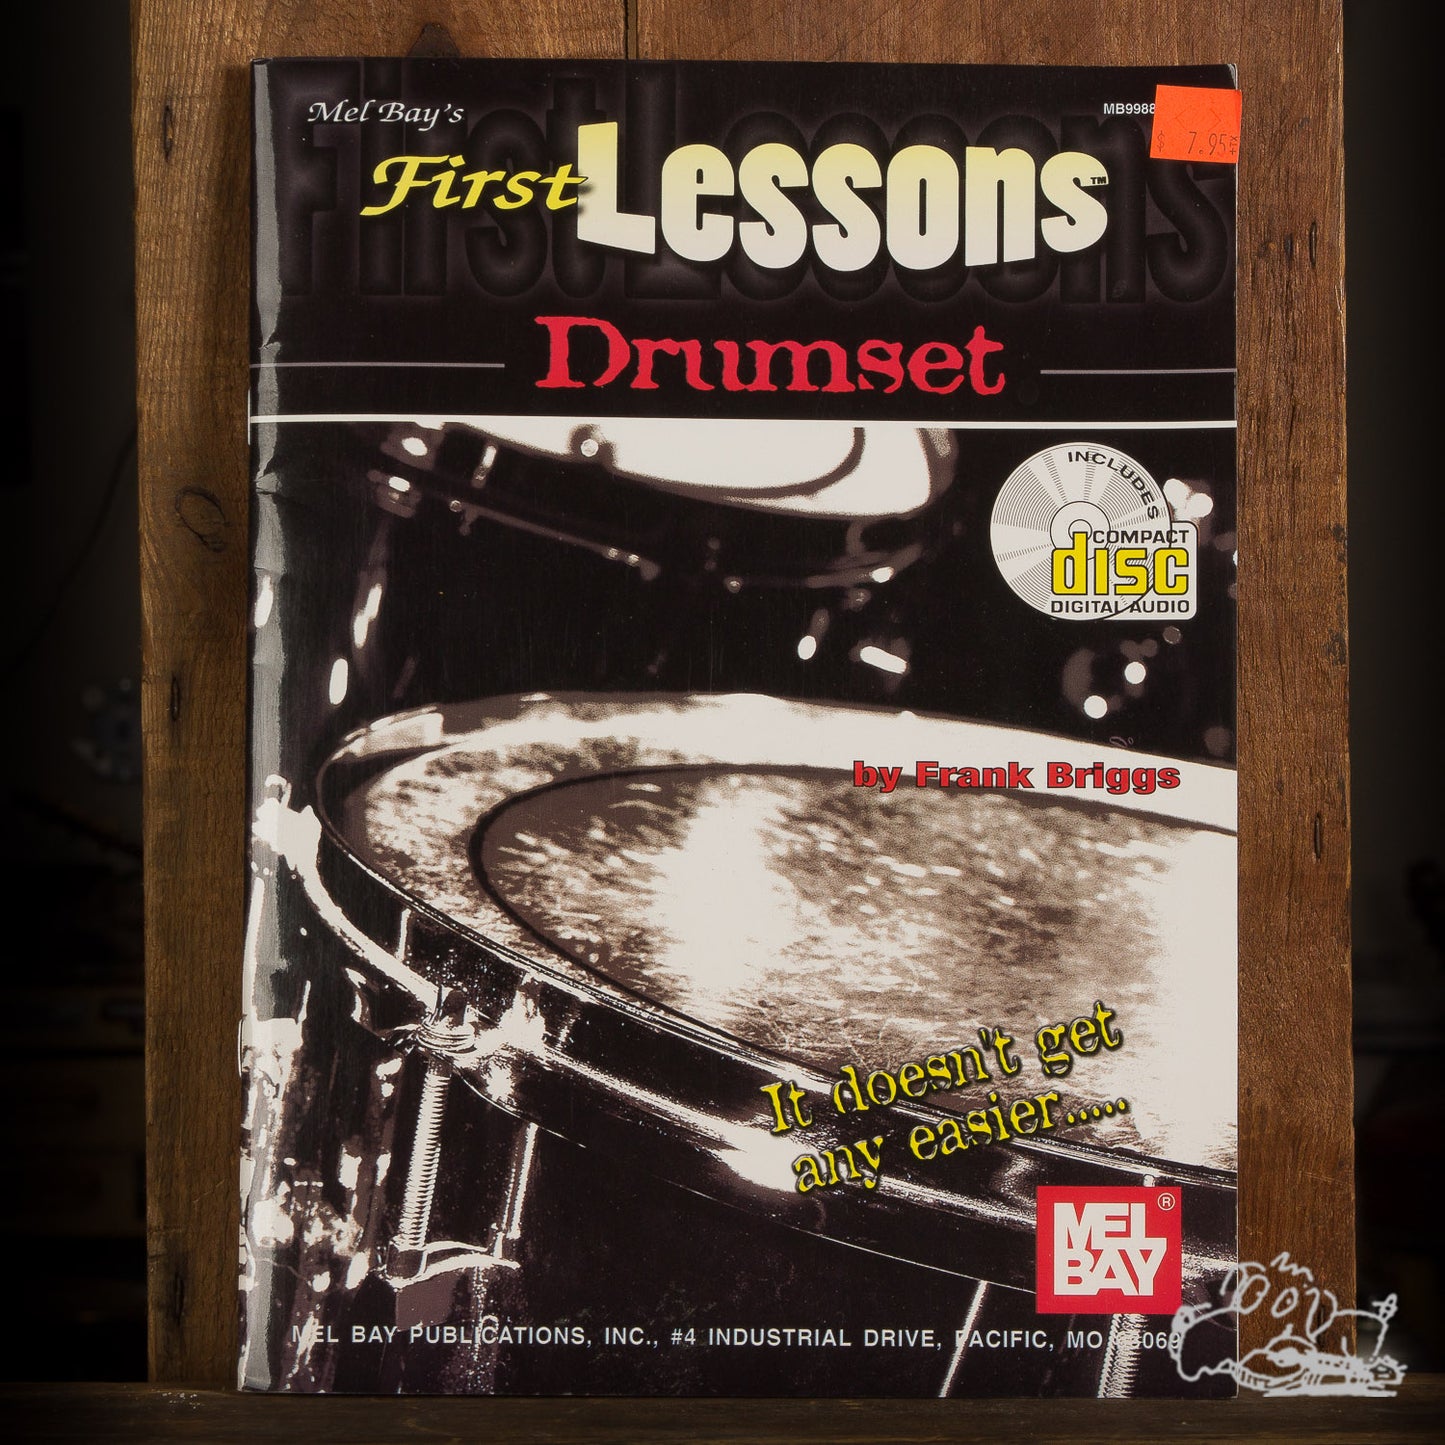 Mel Bay's First Lessons Drumset